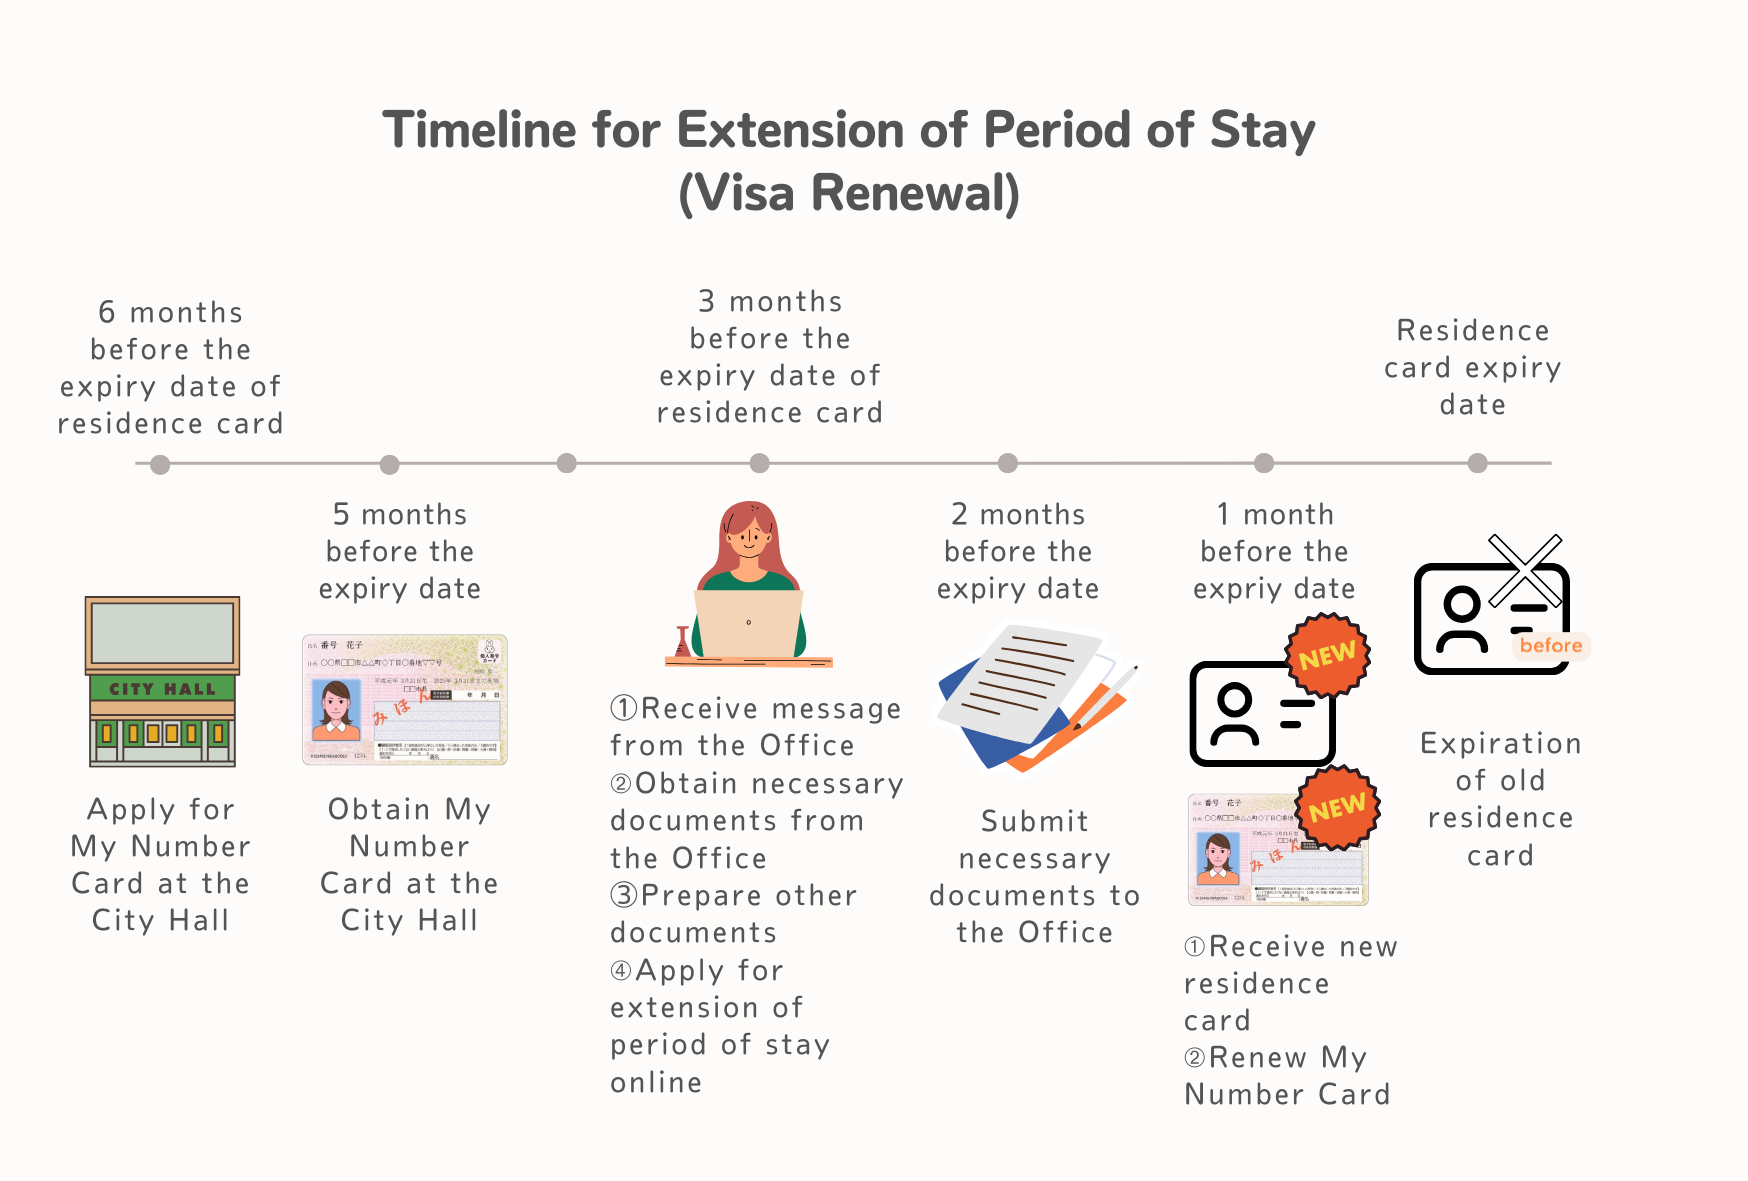 Timeline for Extension of Period of Stay